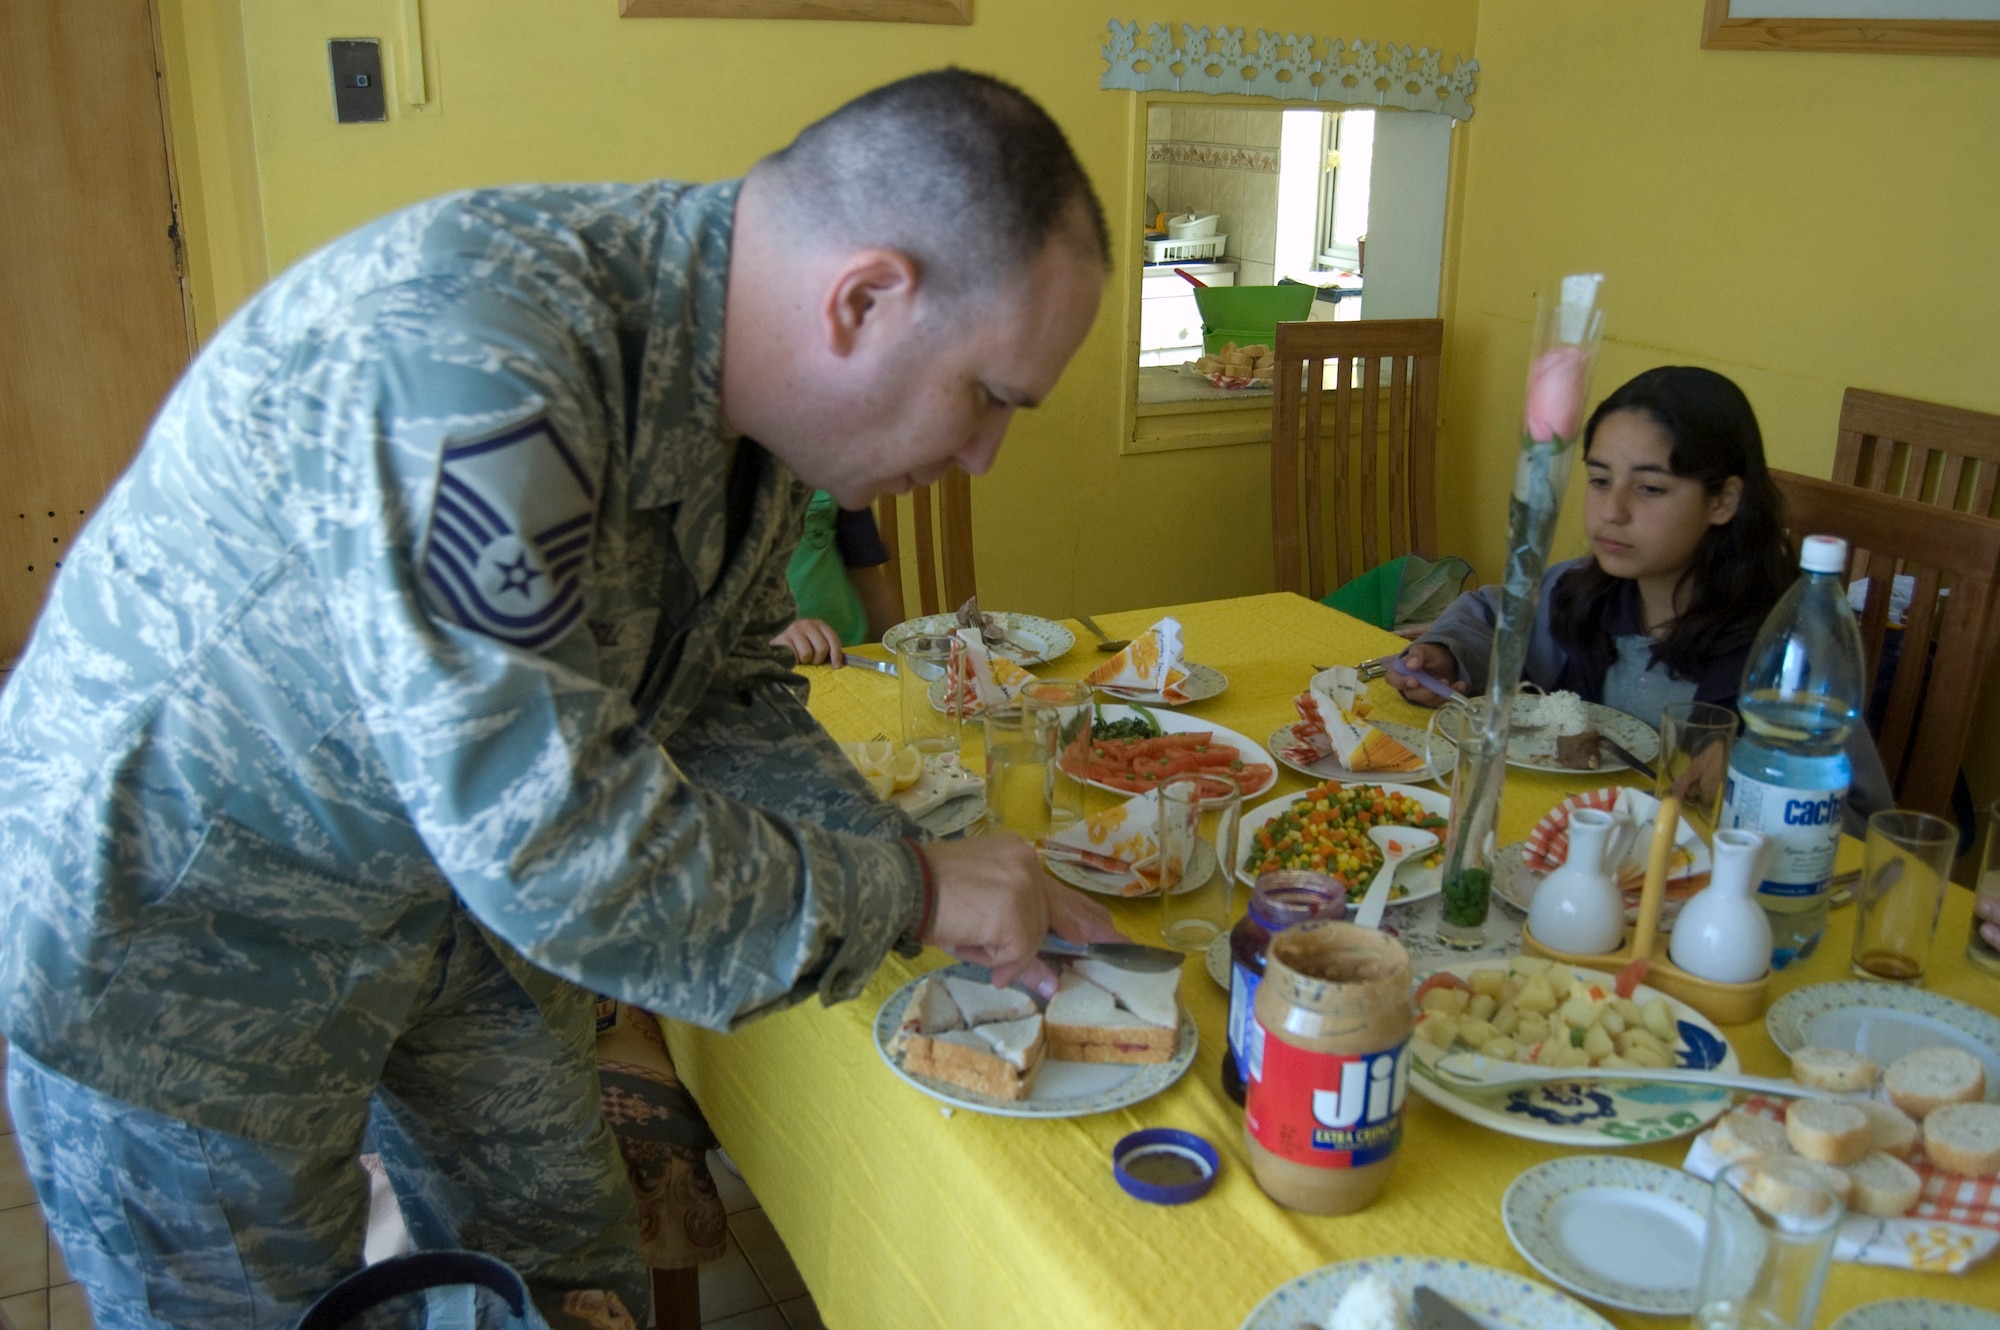 Master Sgt. Eric M. Grill, from the Defense Media Activity-San Antonio in Texas, cuts a peanut butter and jelly sandwich into quarters before serving it to Chilean children at the ALDEAS SOS orphanage in Santiago, Chile on Oct. 29. Sergeant Grill is in South America supporting Operation Southern Partner, a Twelfth Air Force (Air Forces Southern) led event aimed at providing intensive, periodic subject-matter exchanges in the U.S. Southern Command area of focus, started Oct. 26 and ends Nov. 7. (Air Force photo\Dana Willis)